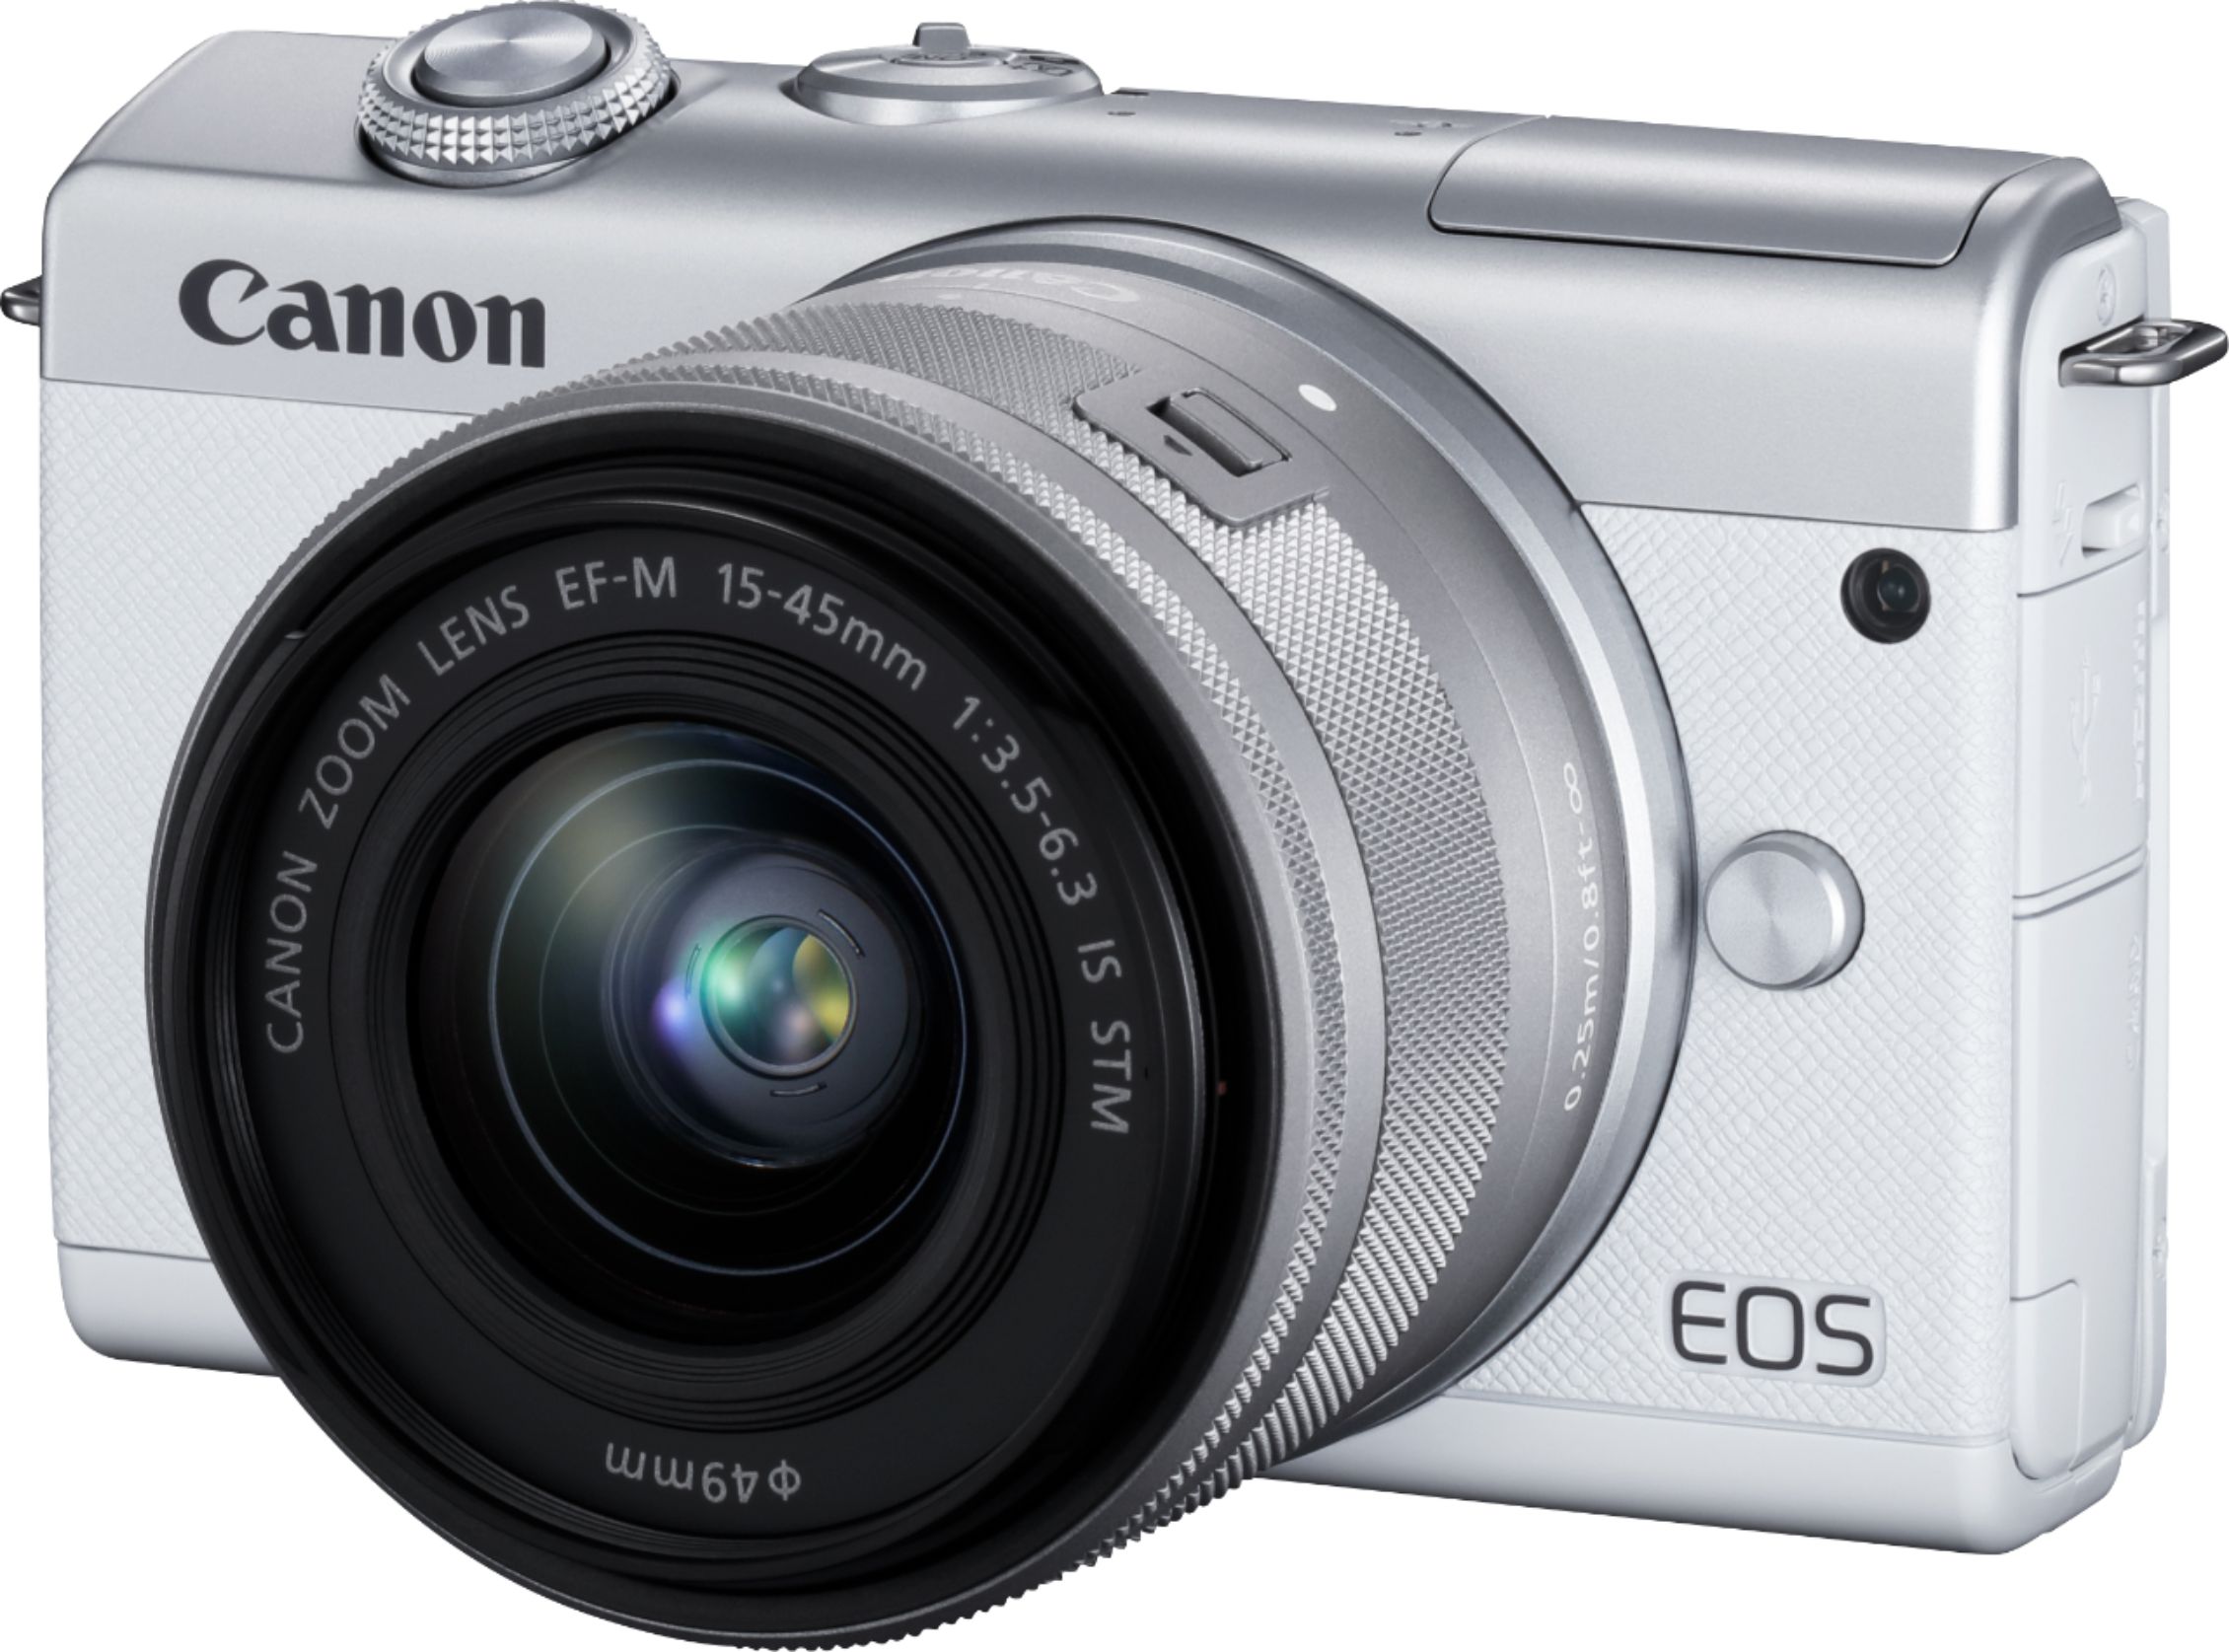 Best Buy: Canon EOS M200 Mirrorless Camera with EF-M 15-45mm Lens